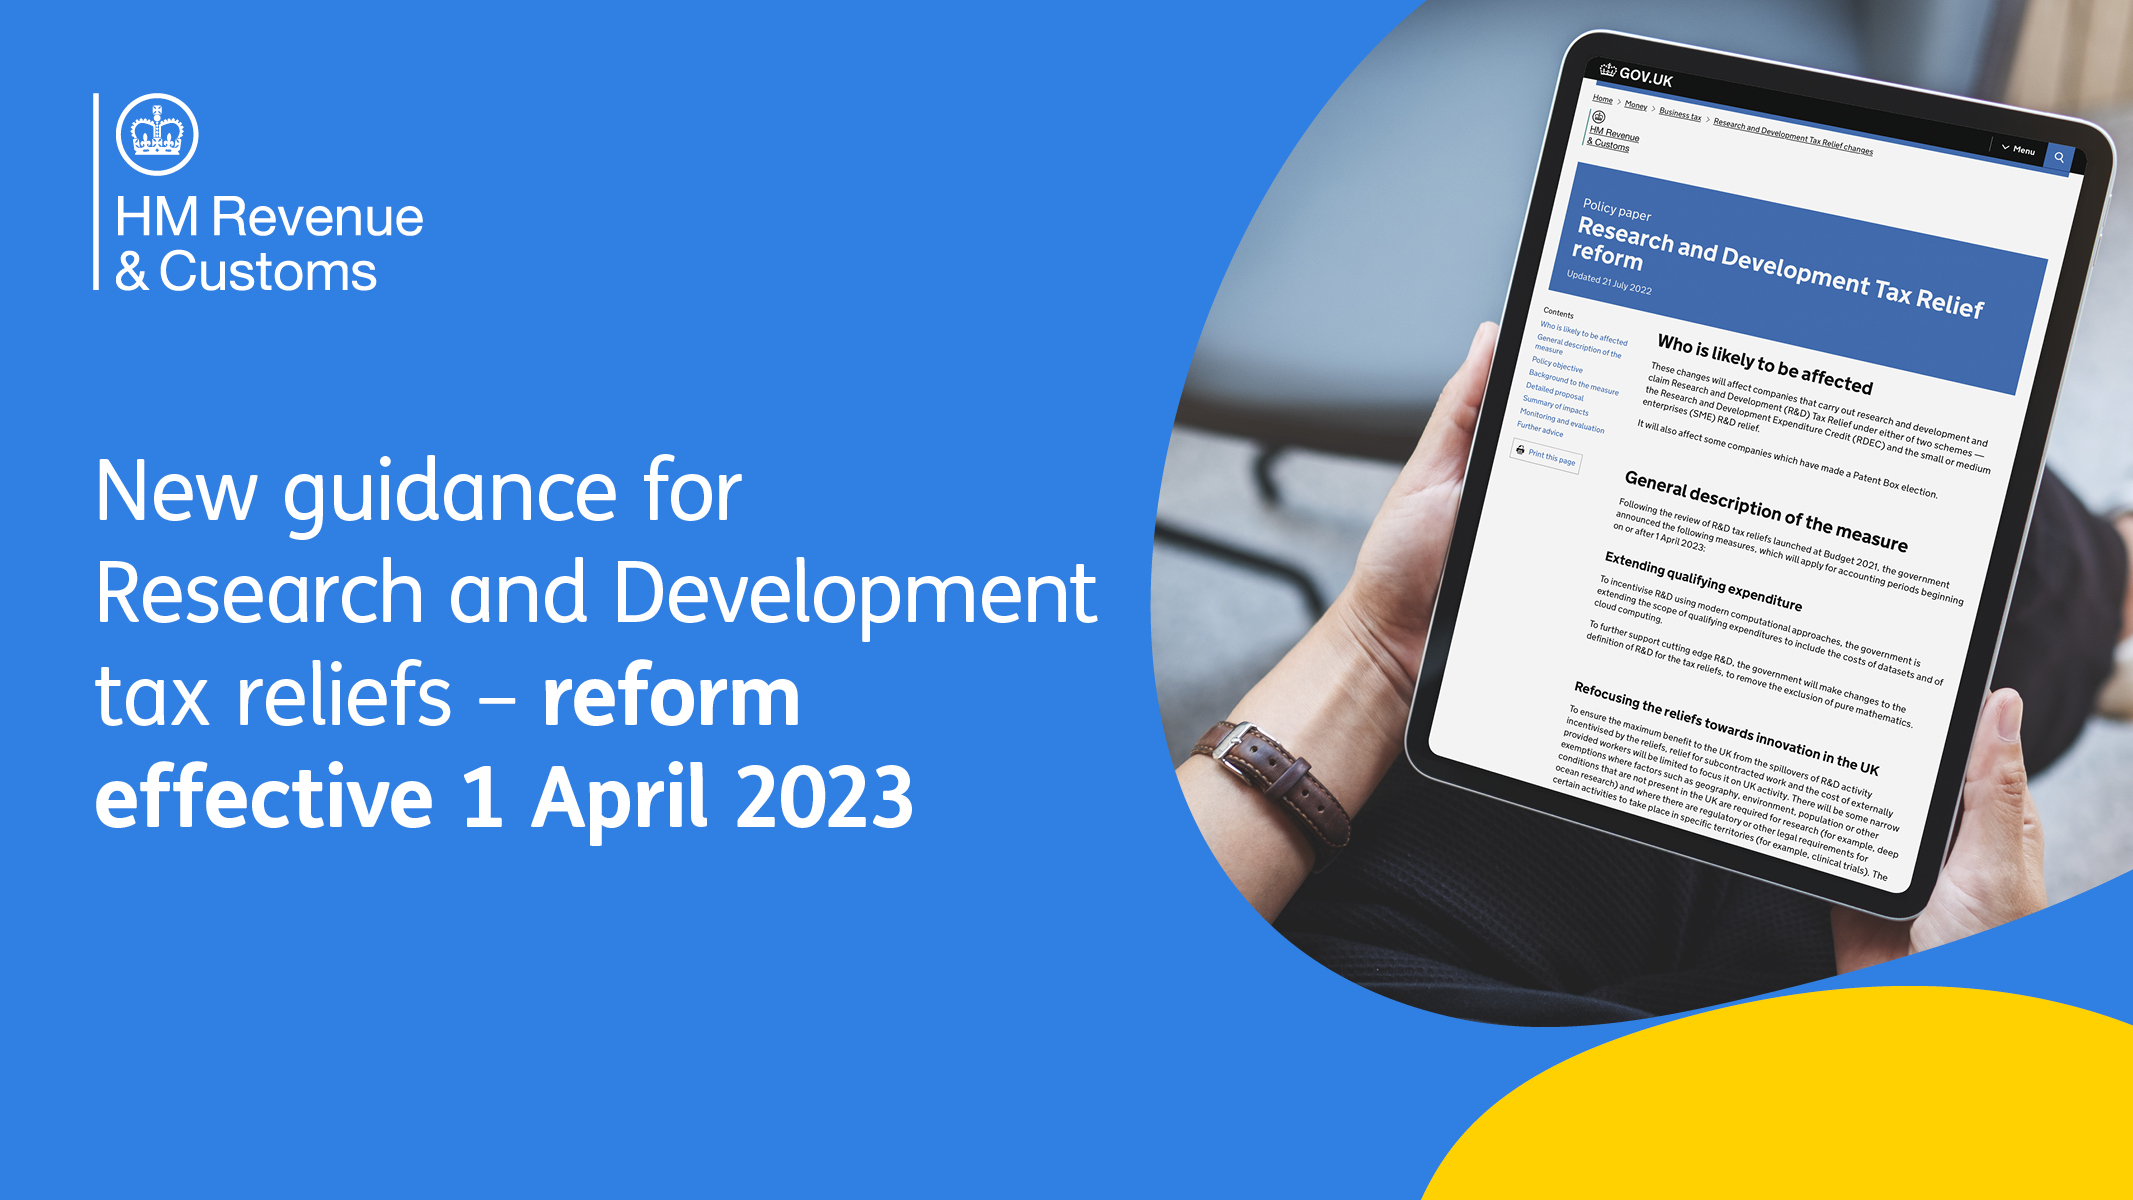 R&D tax relief changes from 1 April 2023